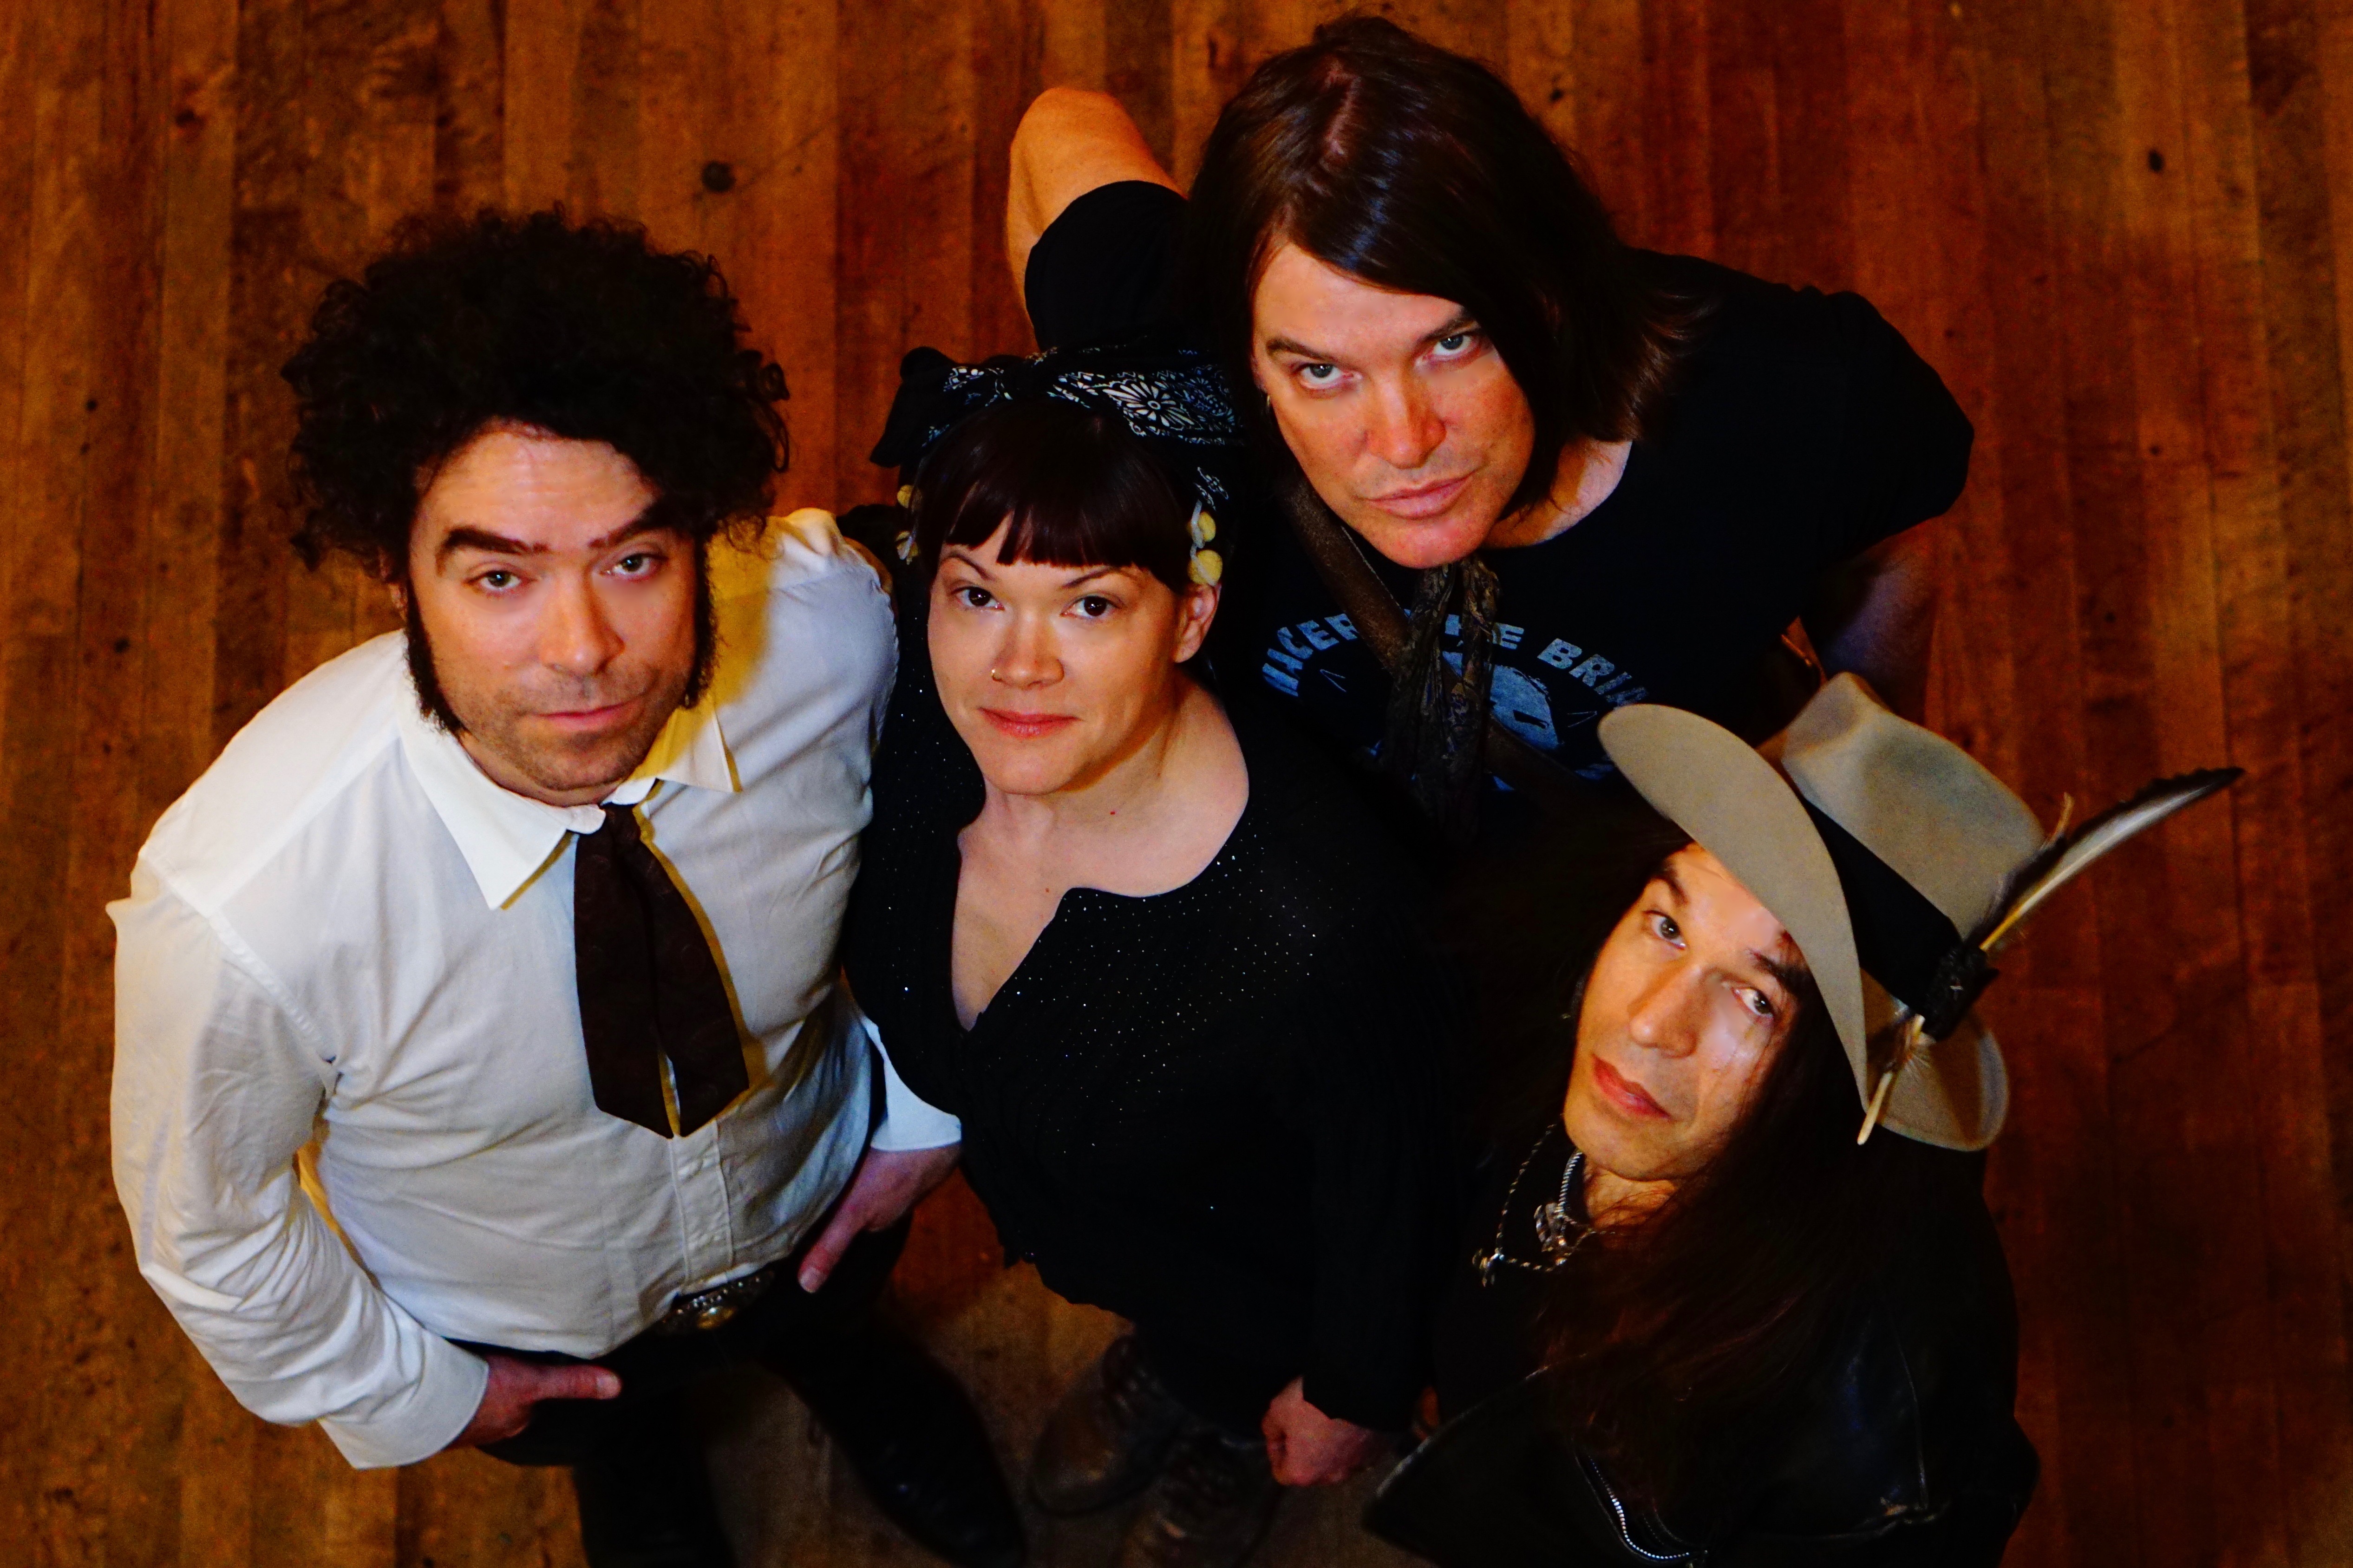 News – The Dandy Warhols – I’d Like To Help You With Your Problem (feat. Slash)